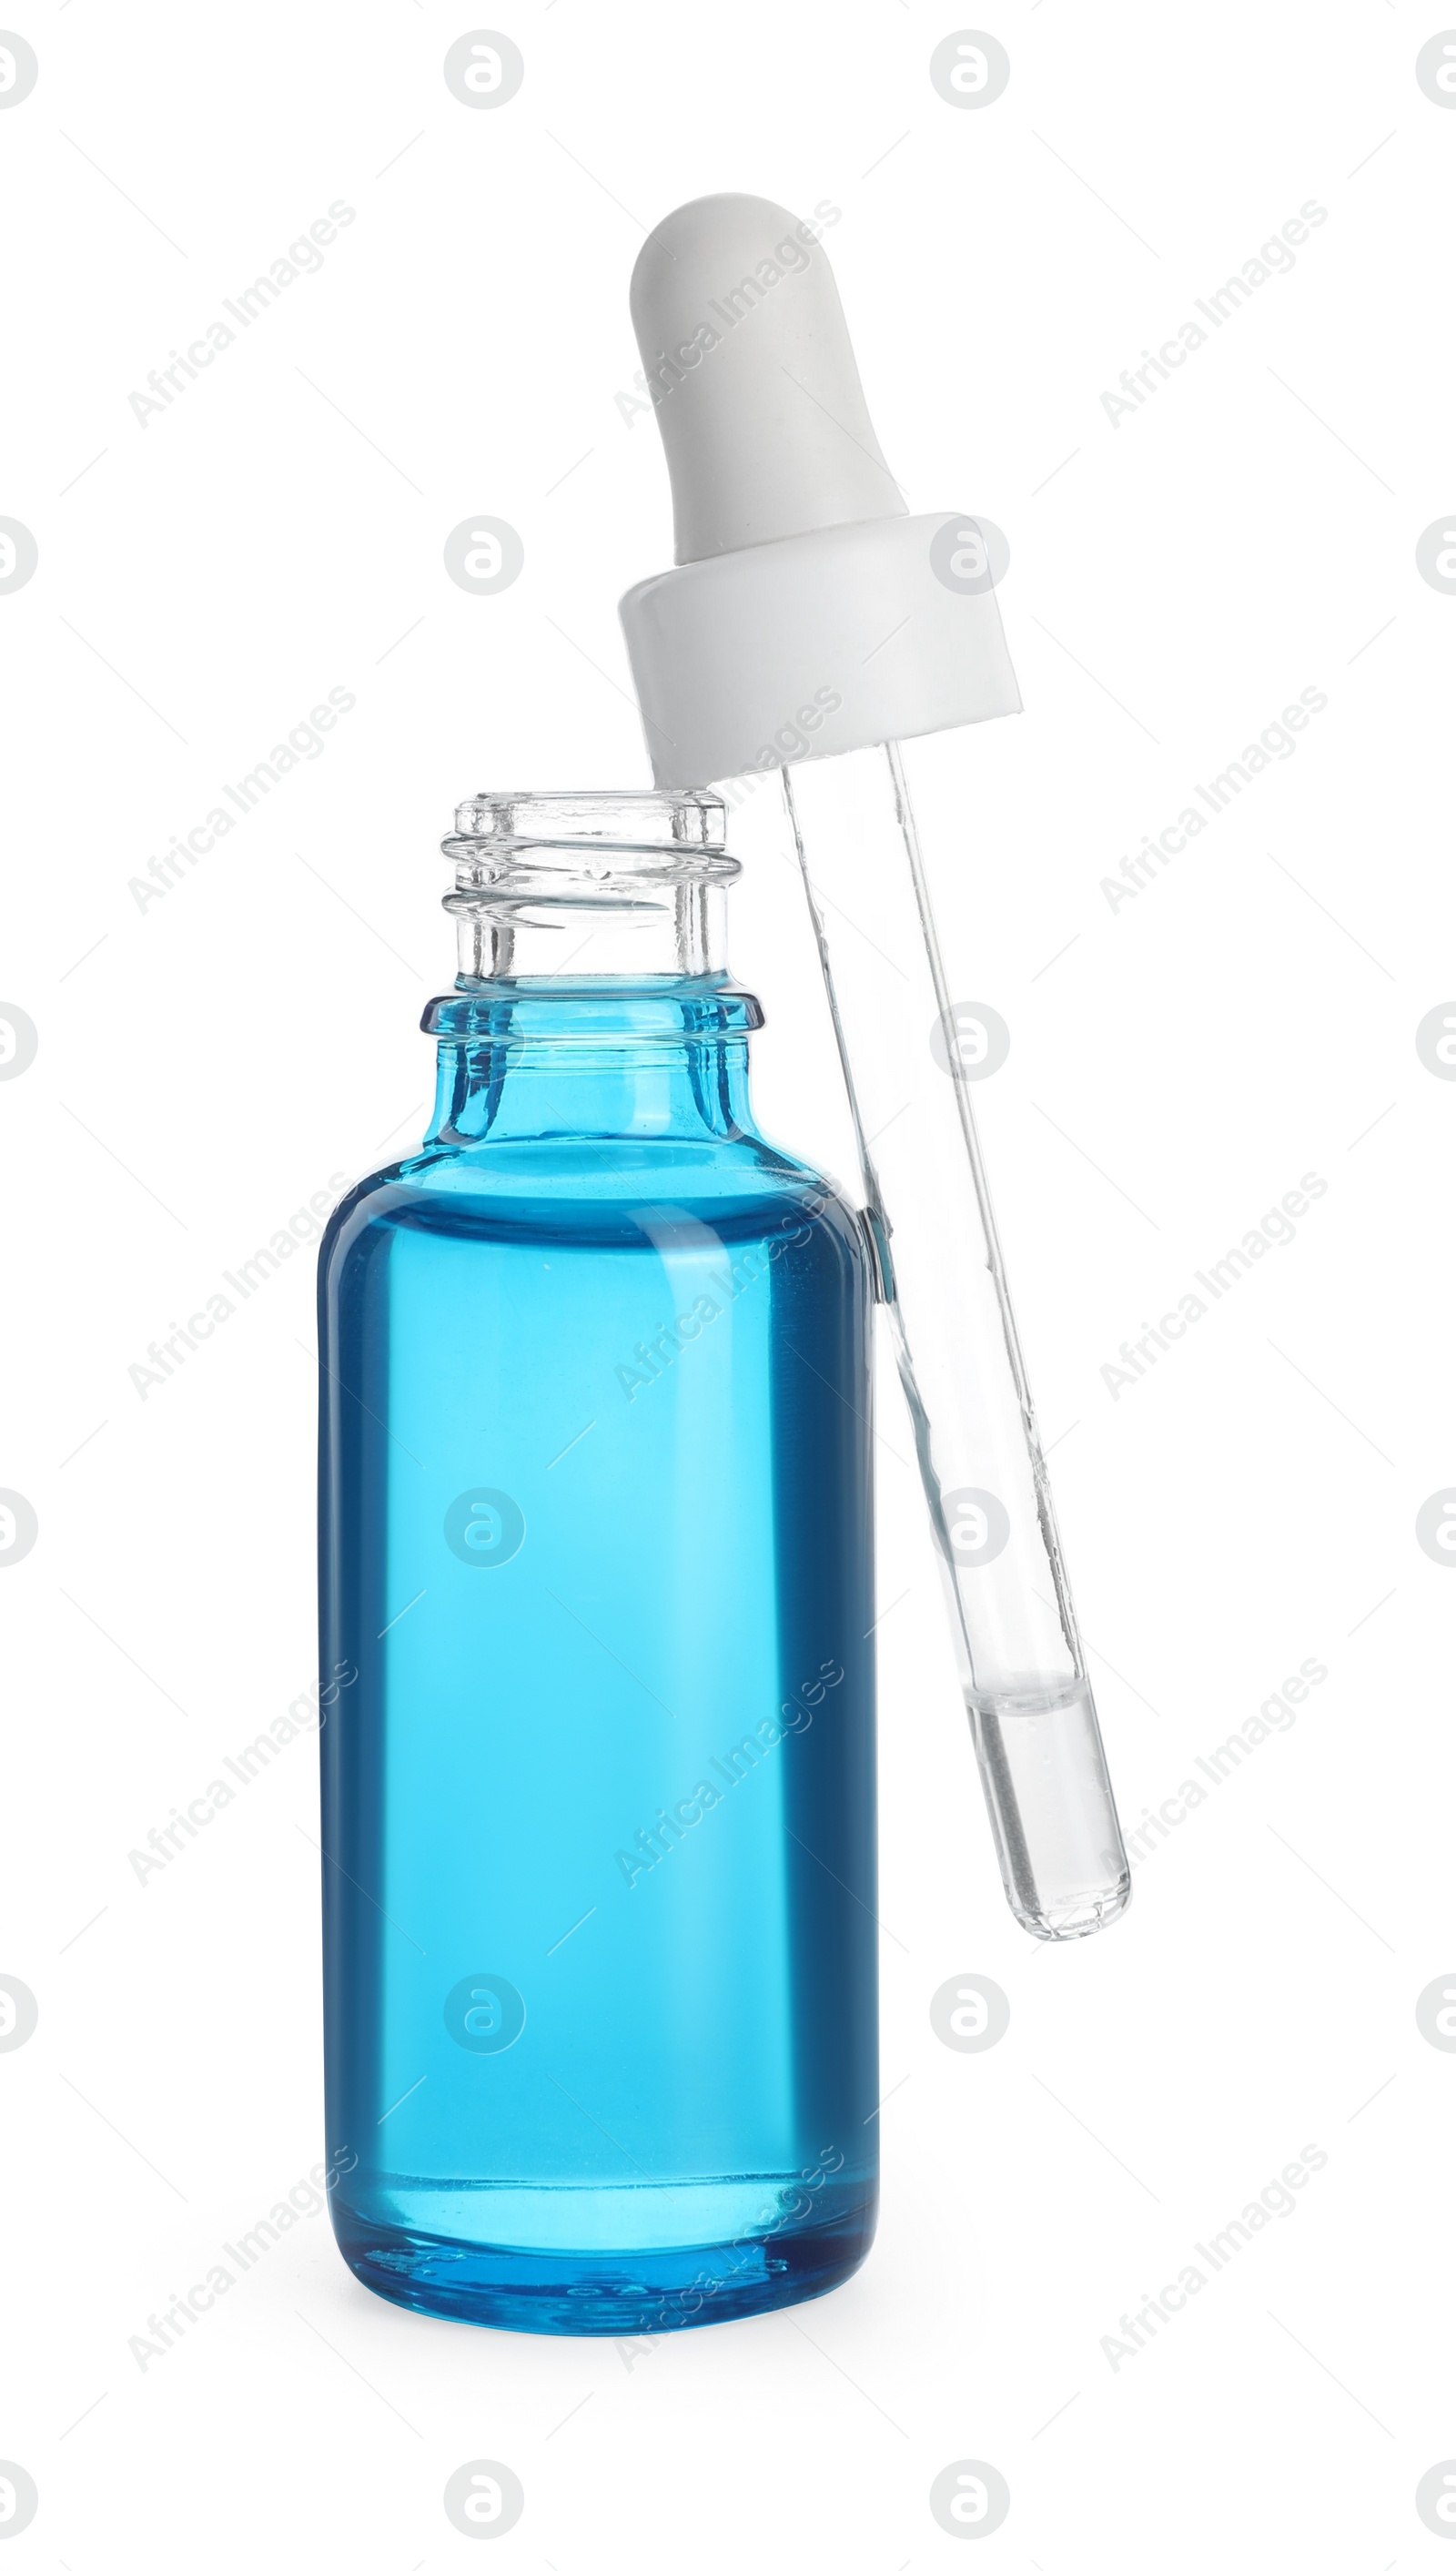 Photo of Bottle with cosmetic product and pipette isolated on white